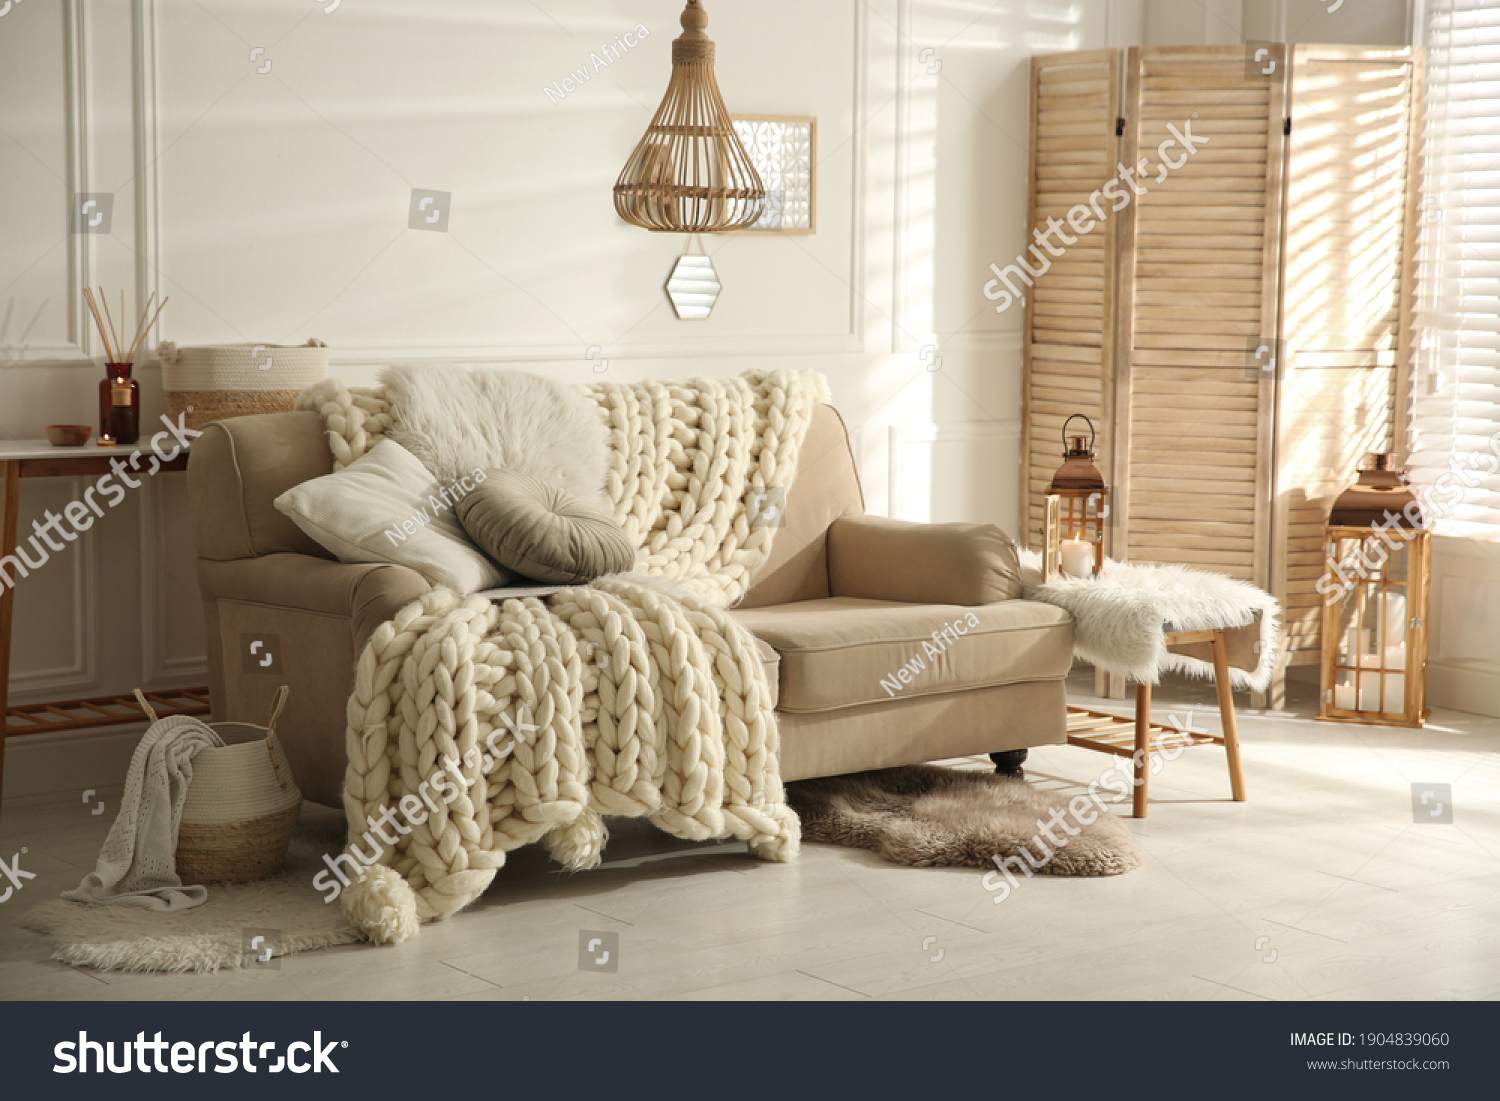 Cozy living room interior with beige sofa, knitted blanket and cushions #1904839060